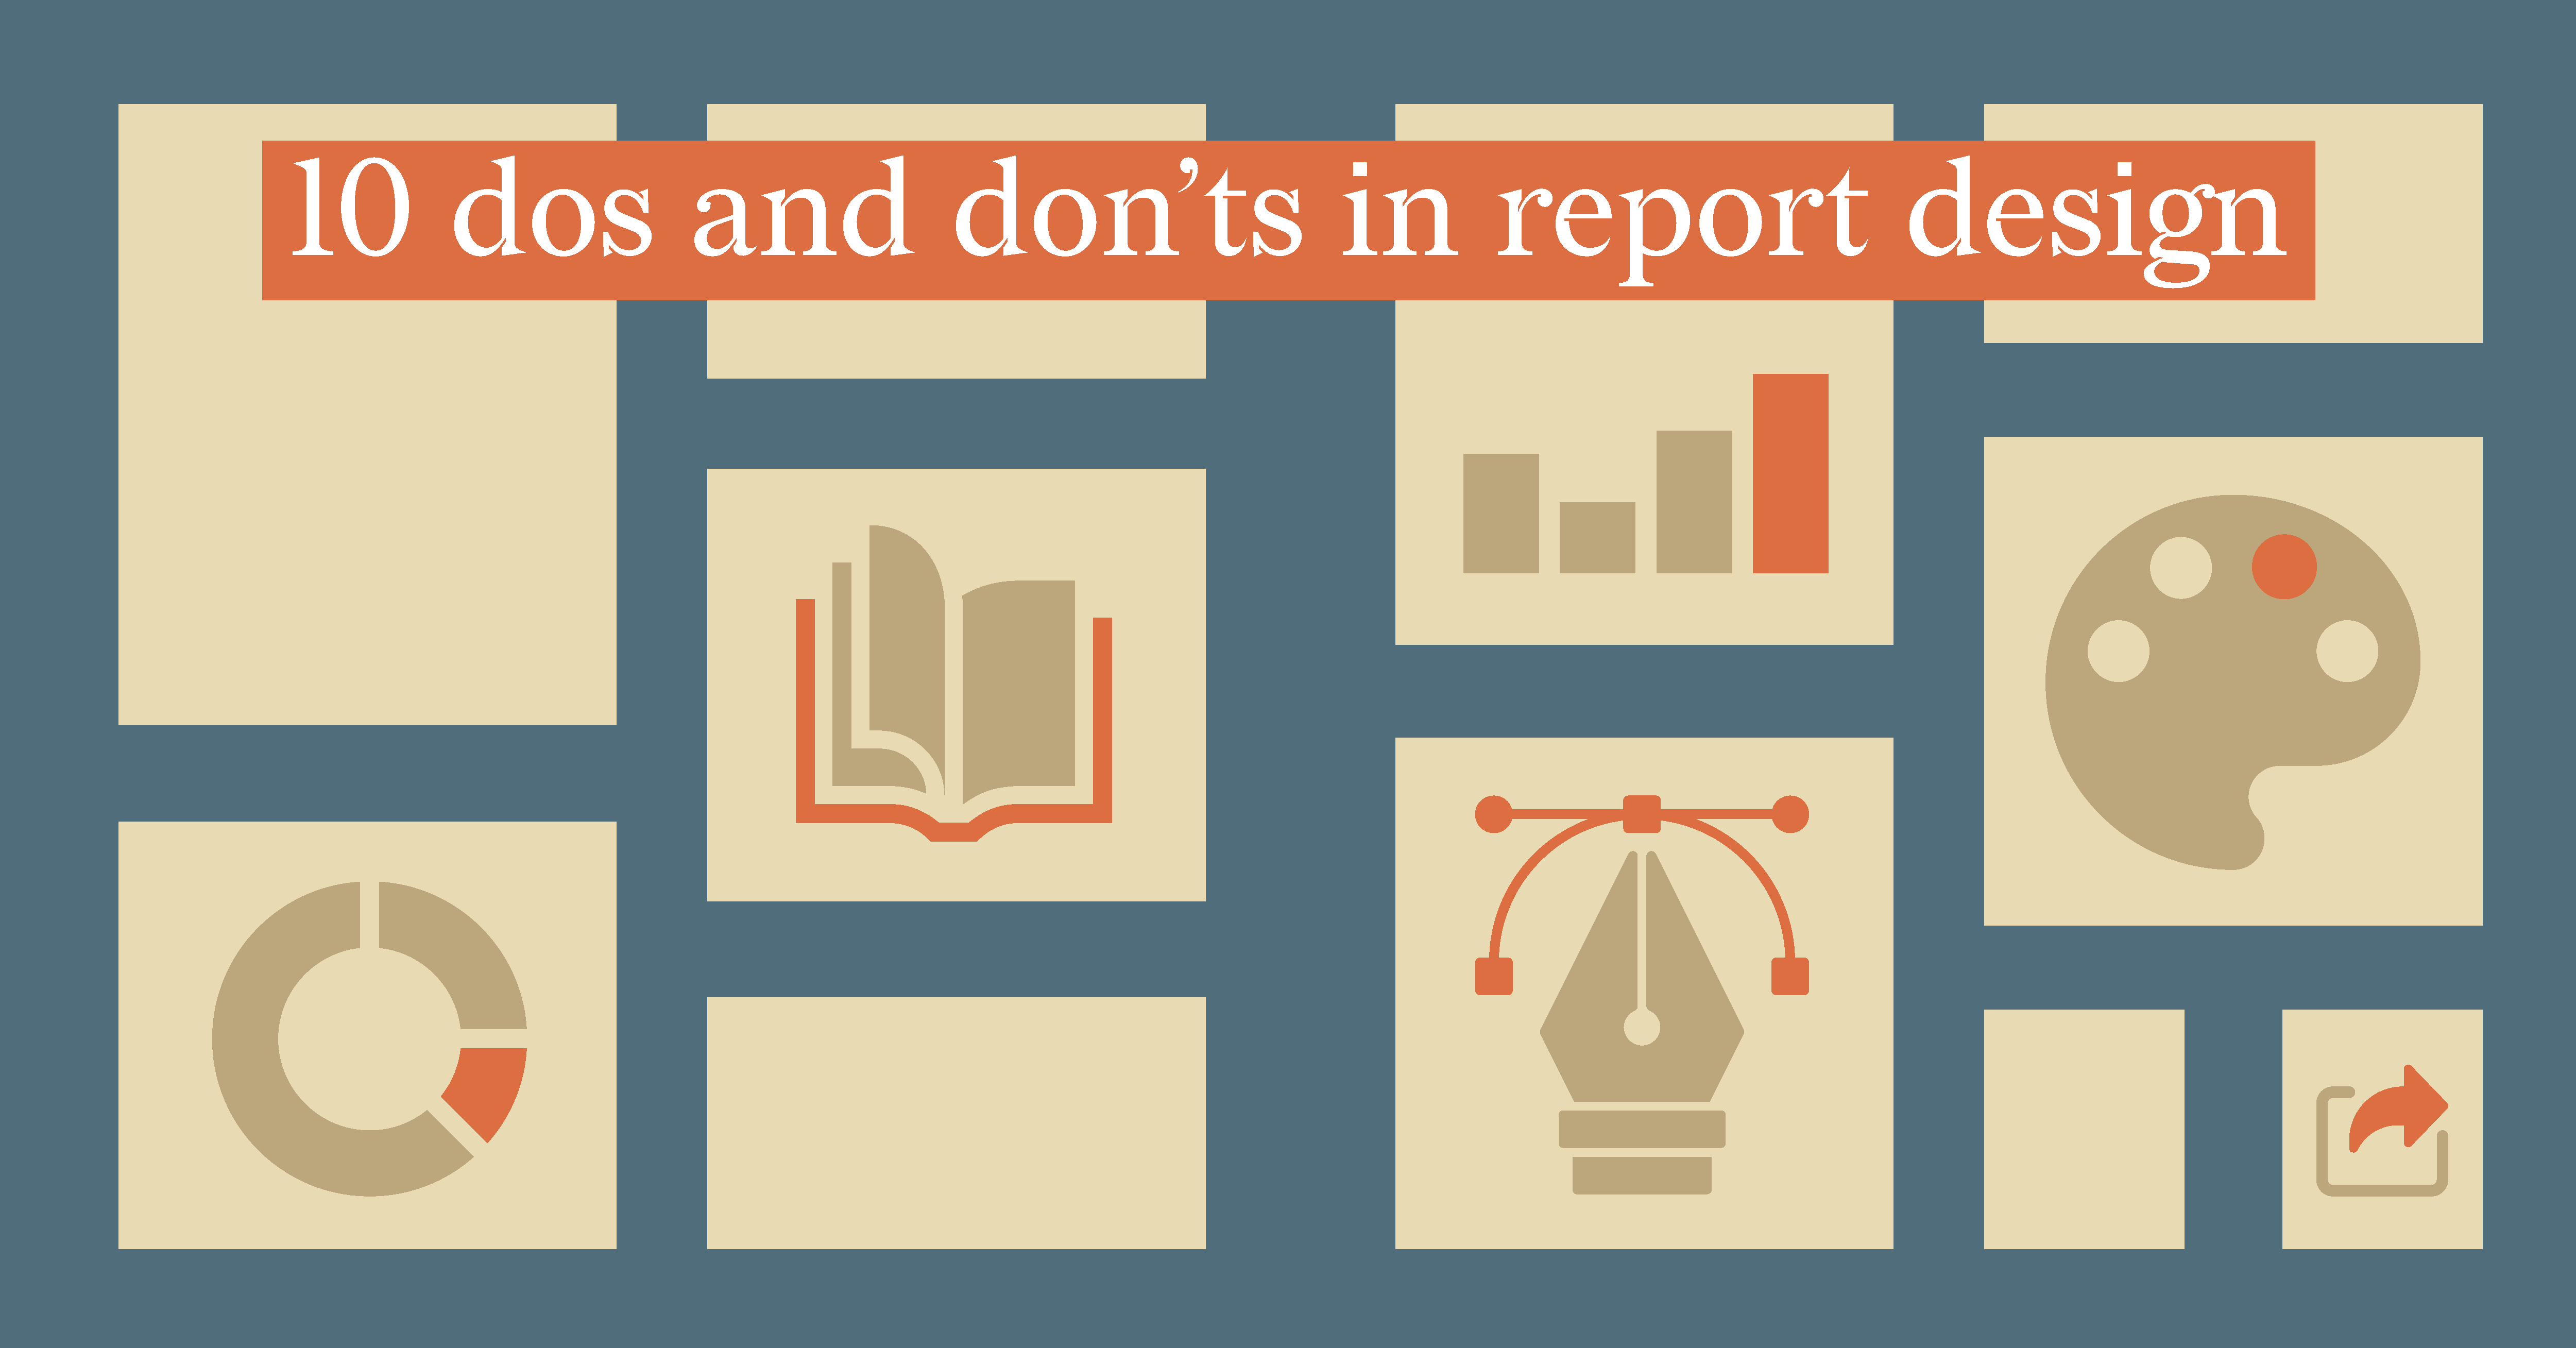 10 dos and don'ts in report design - this featured image shows an illustration supporting the title of the article.